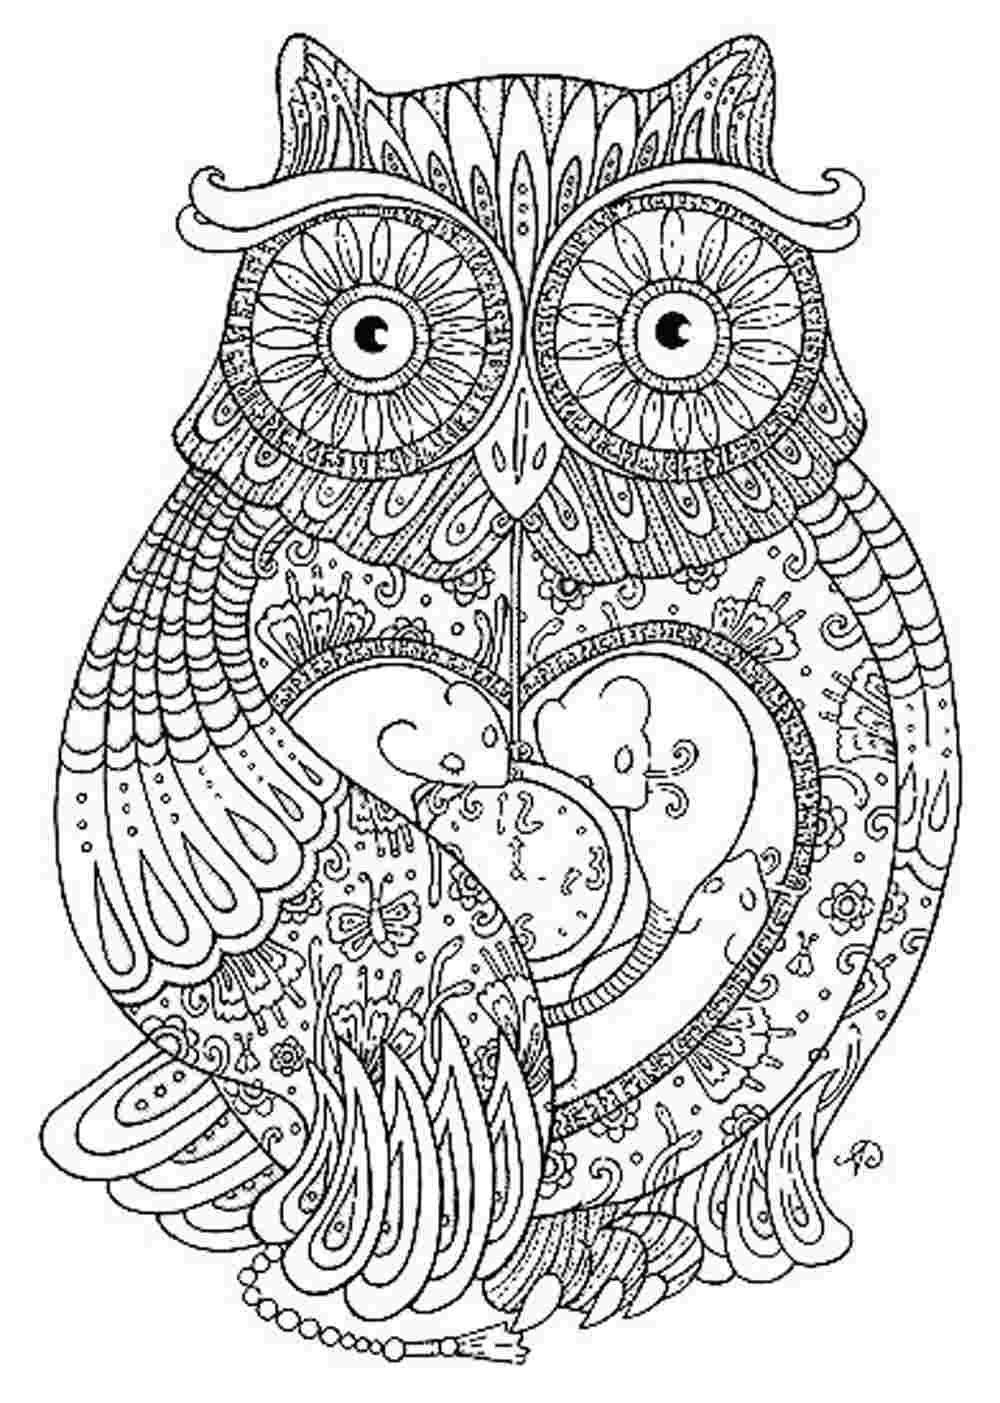 Free Printable Adult Coloring Pages Unique Abstract Image 40 ...